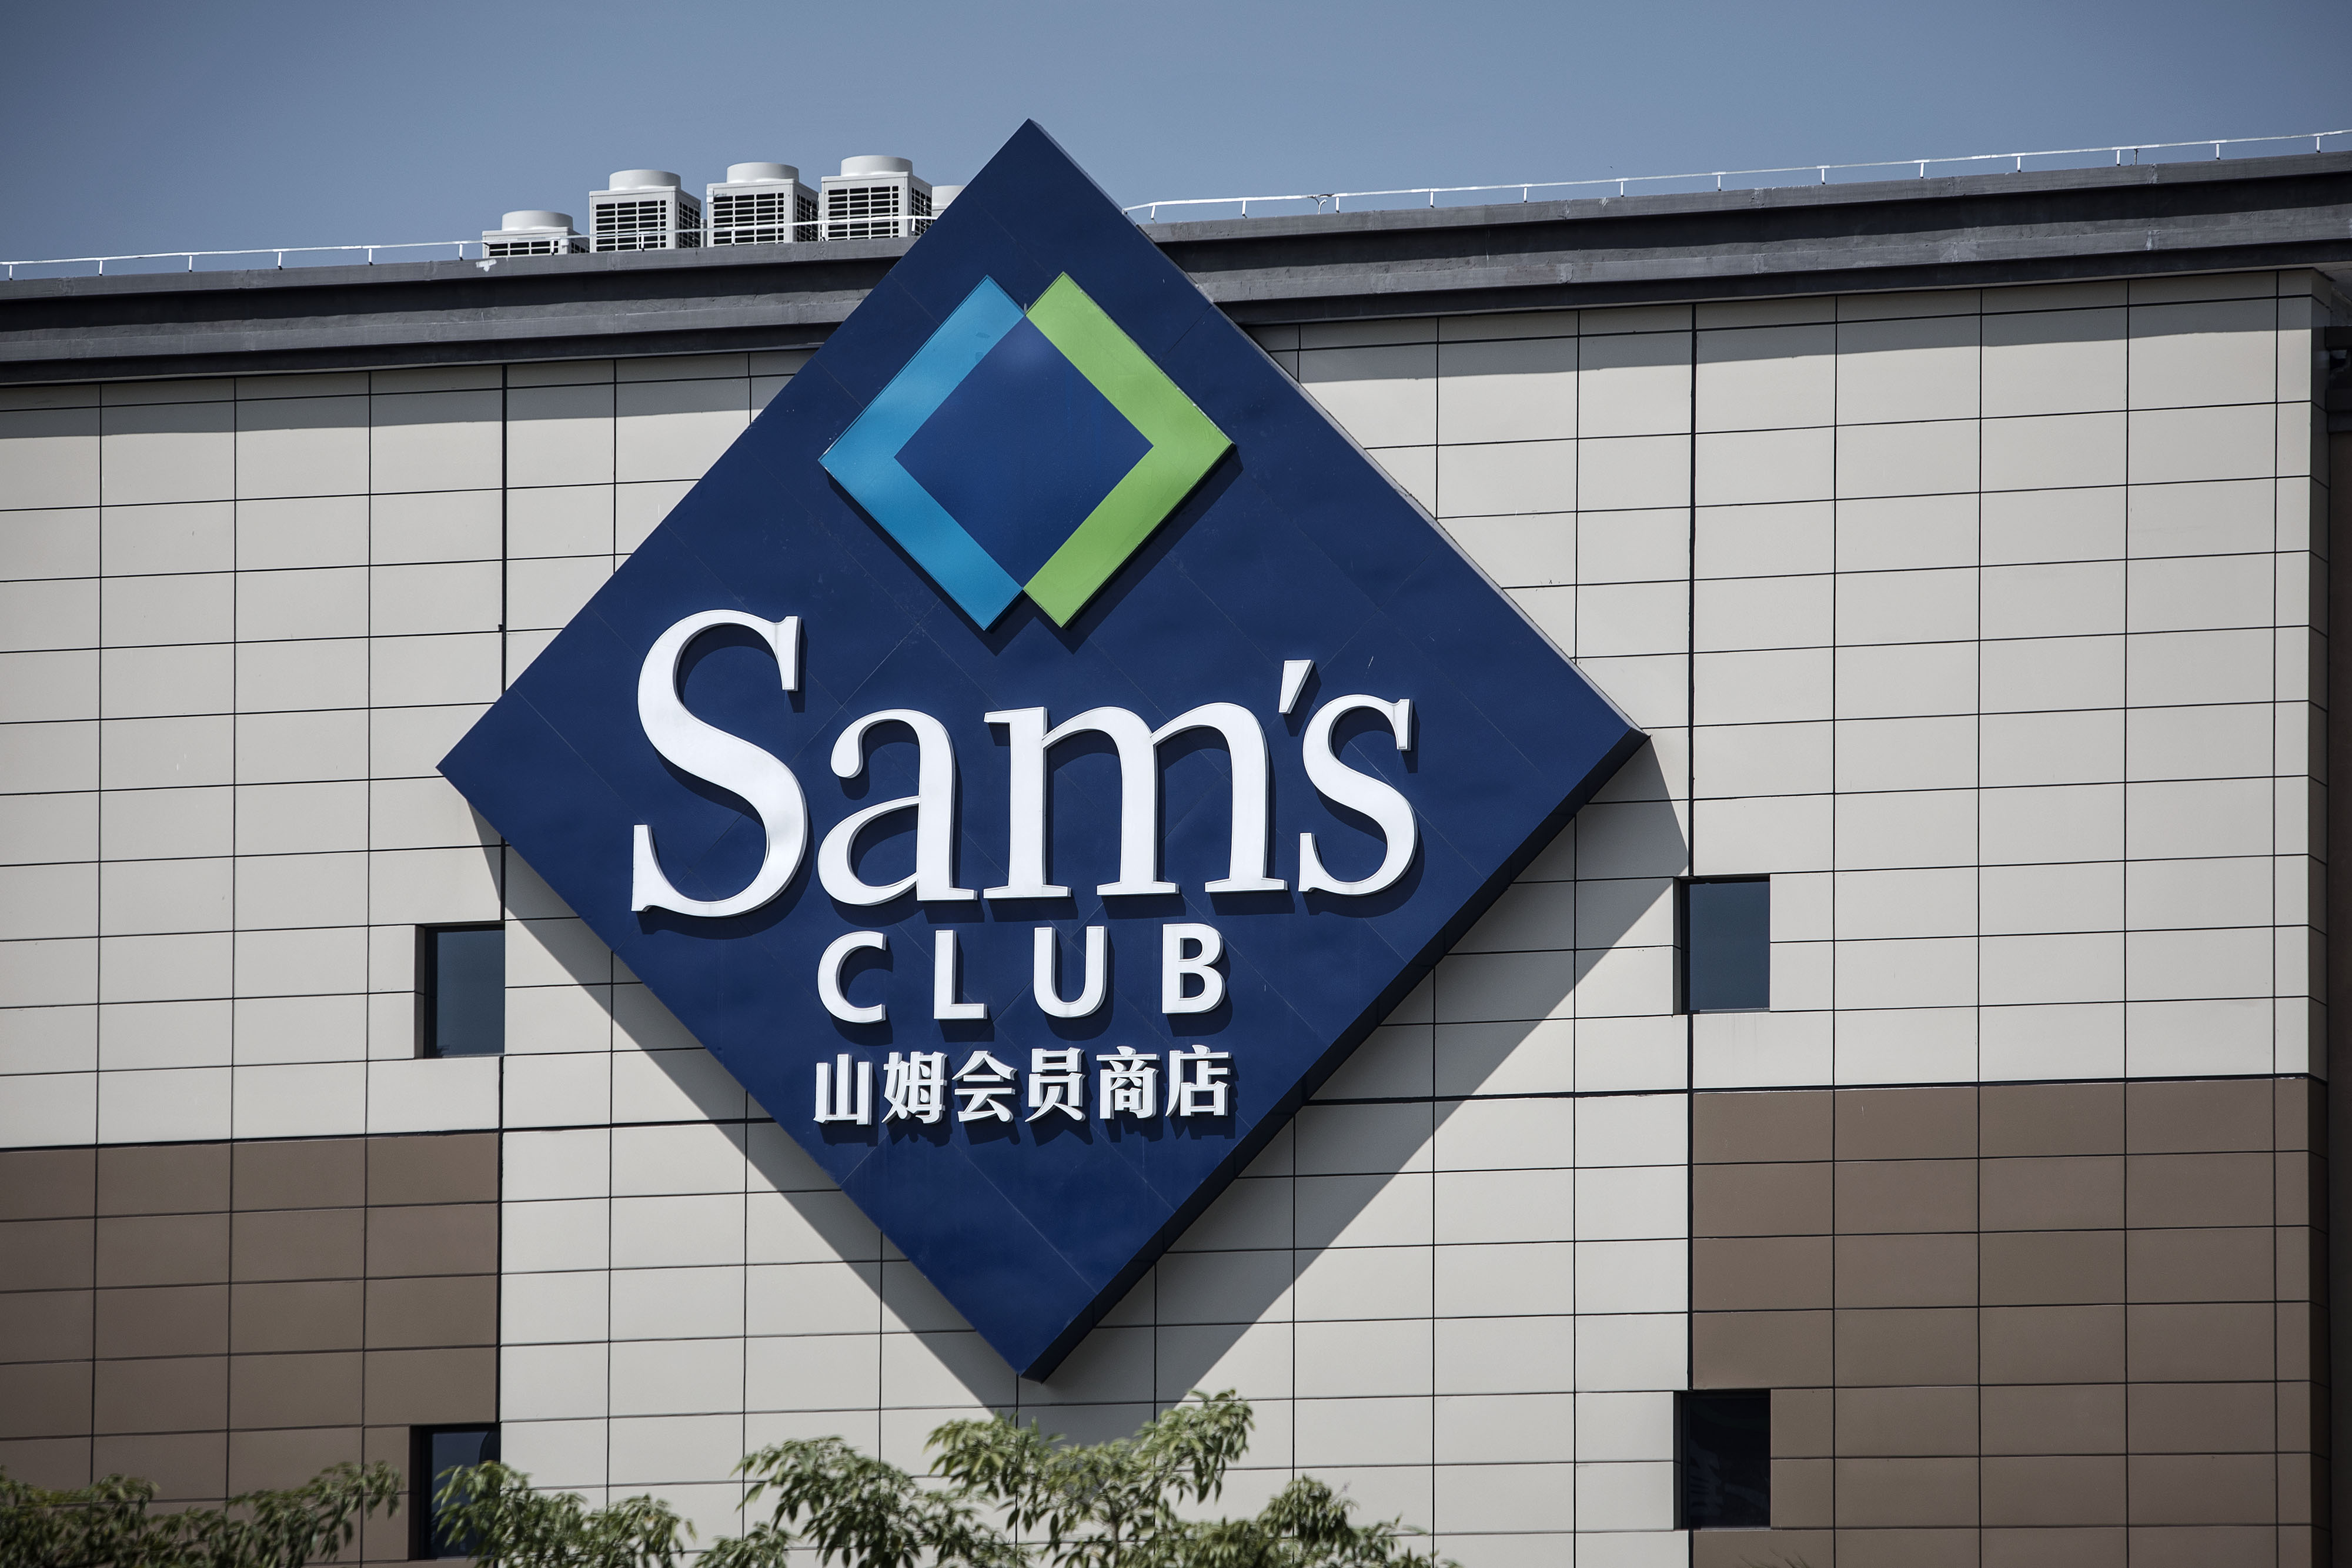 Is Sam's Club open on Memorial Day?